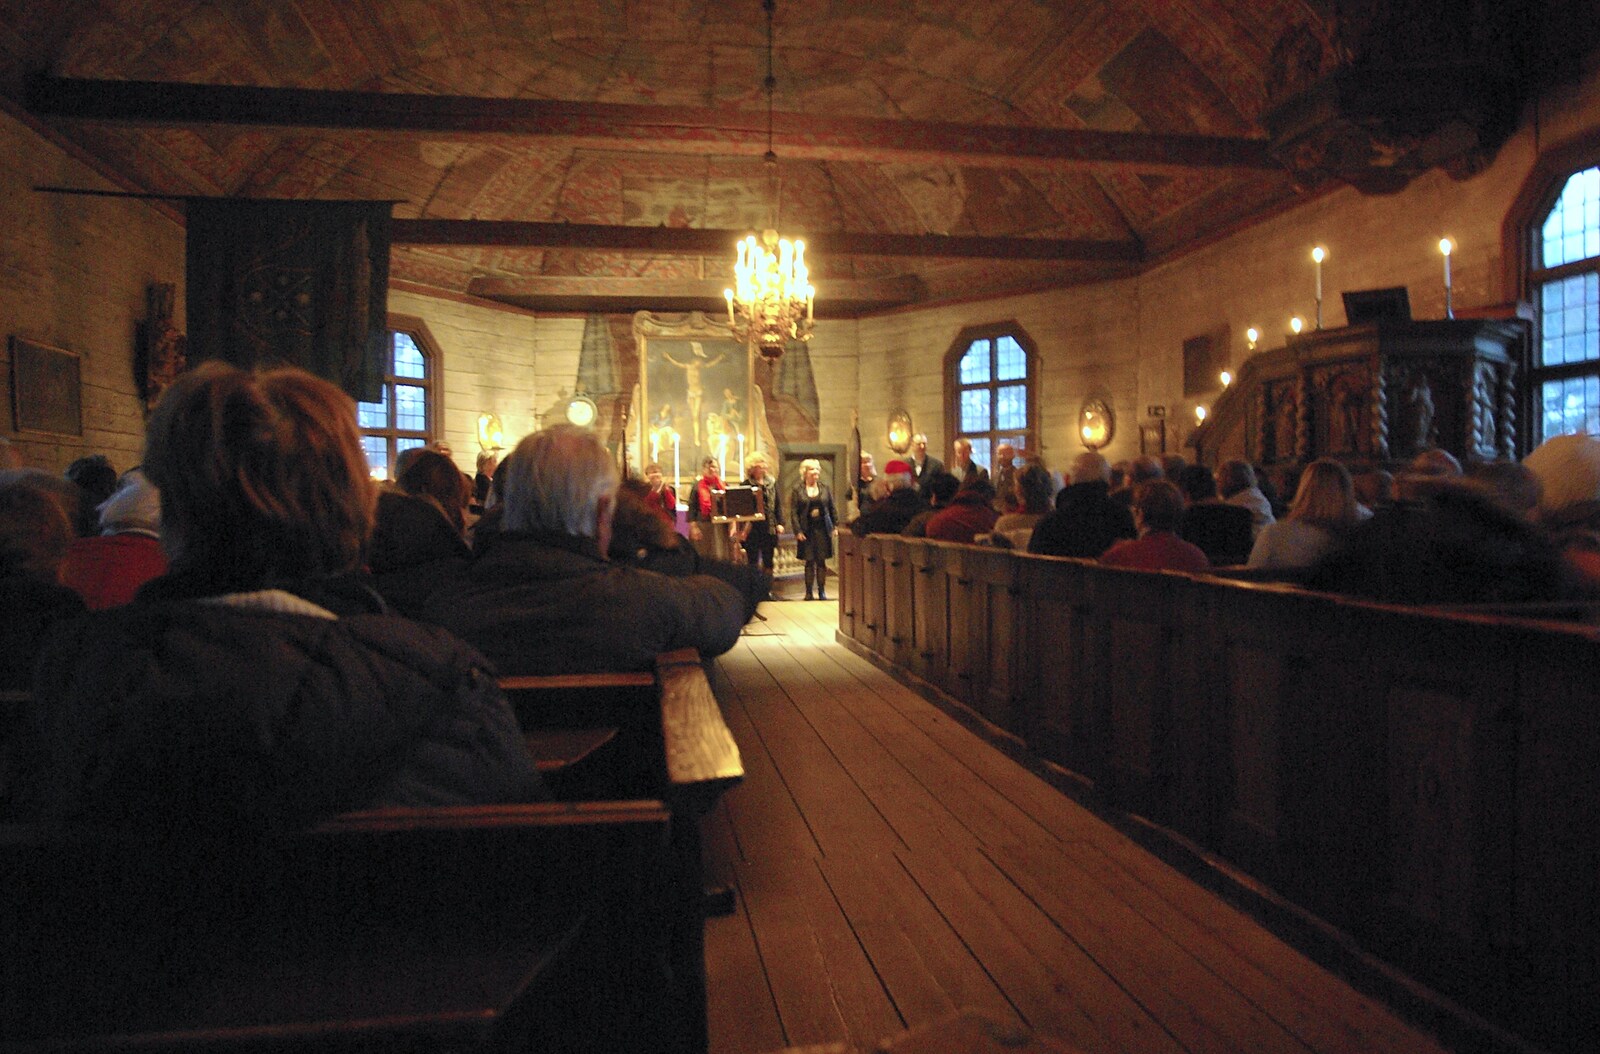 Festive singing in a candle-lit 18th Century church from A Few Hours in Skansen, Stockholm, Sweden - 17th December 2007